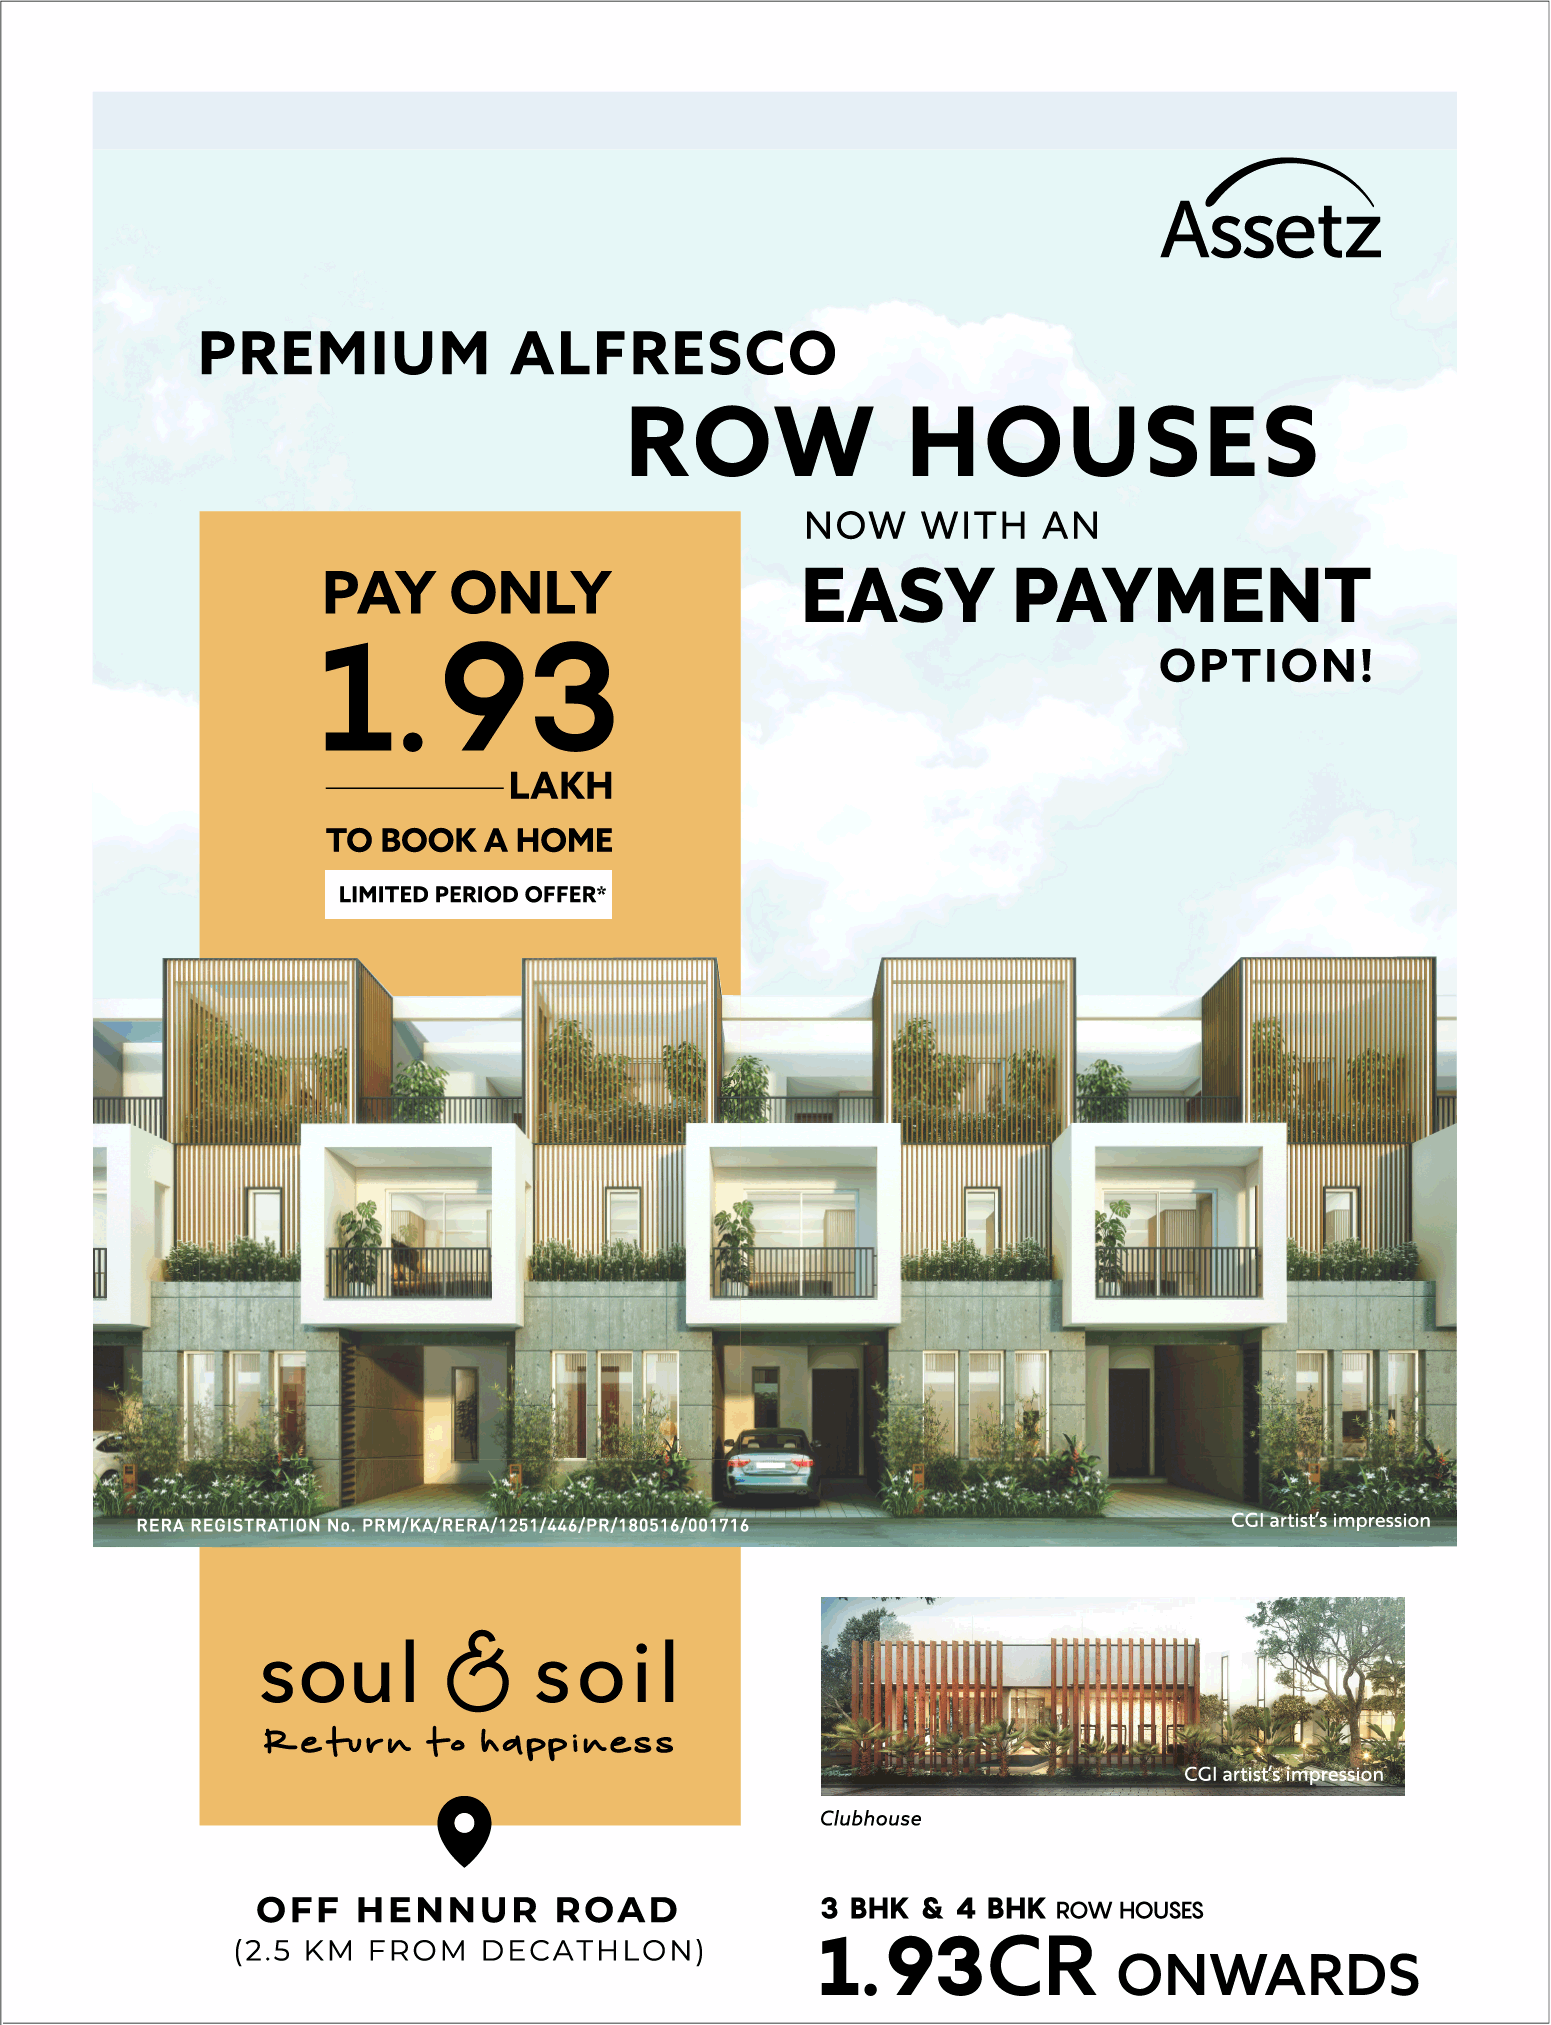 Book premium alfresco row house with an easy payment option at Assetz Soul & Soil in Bangalore